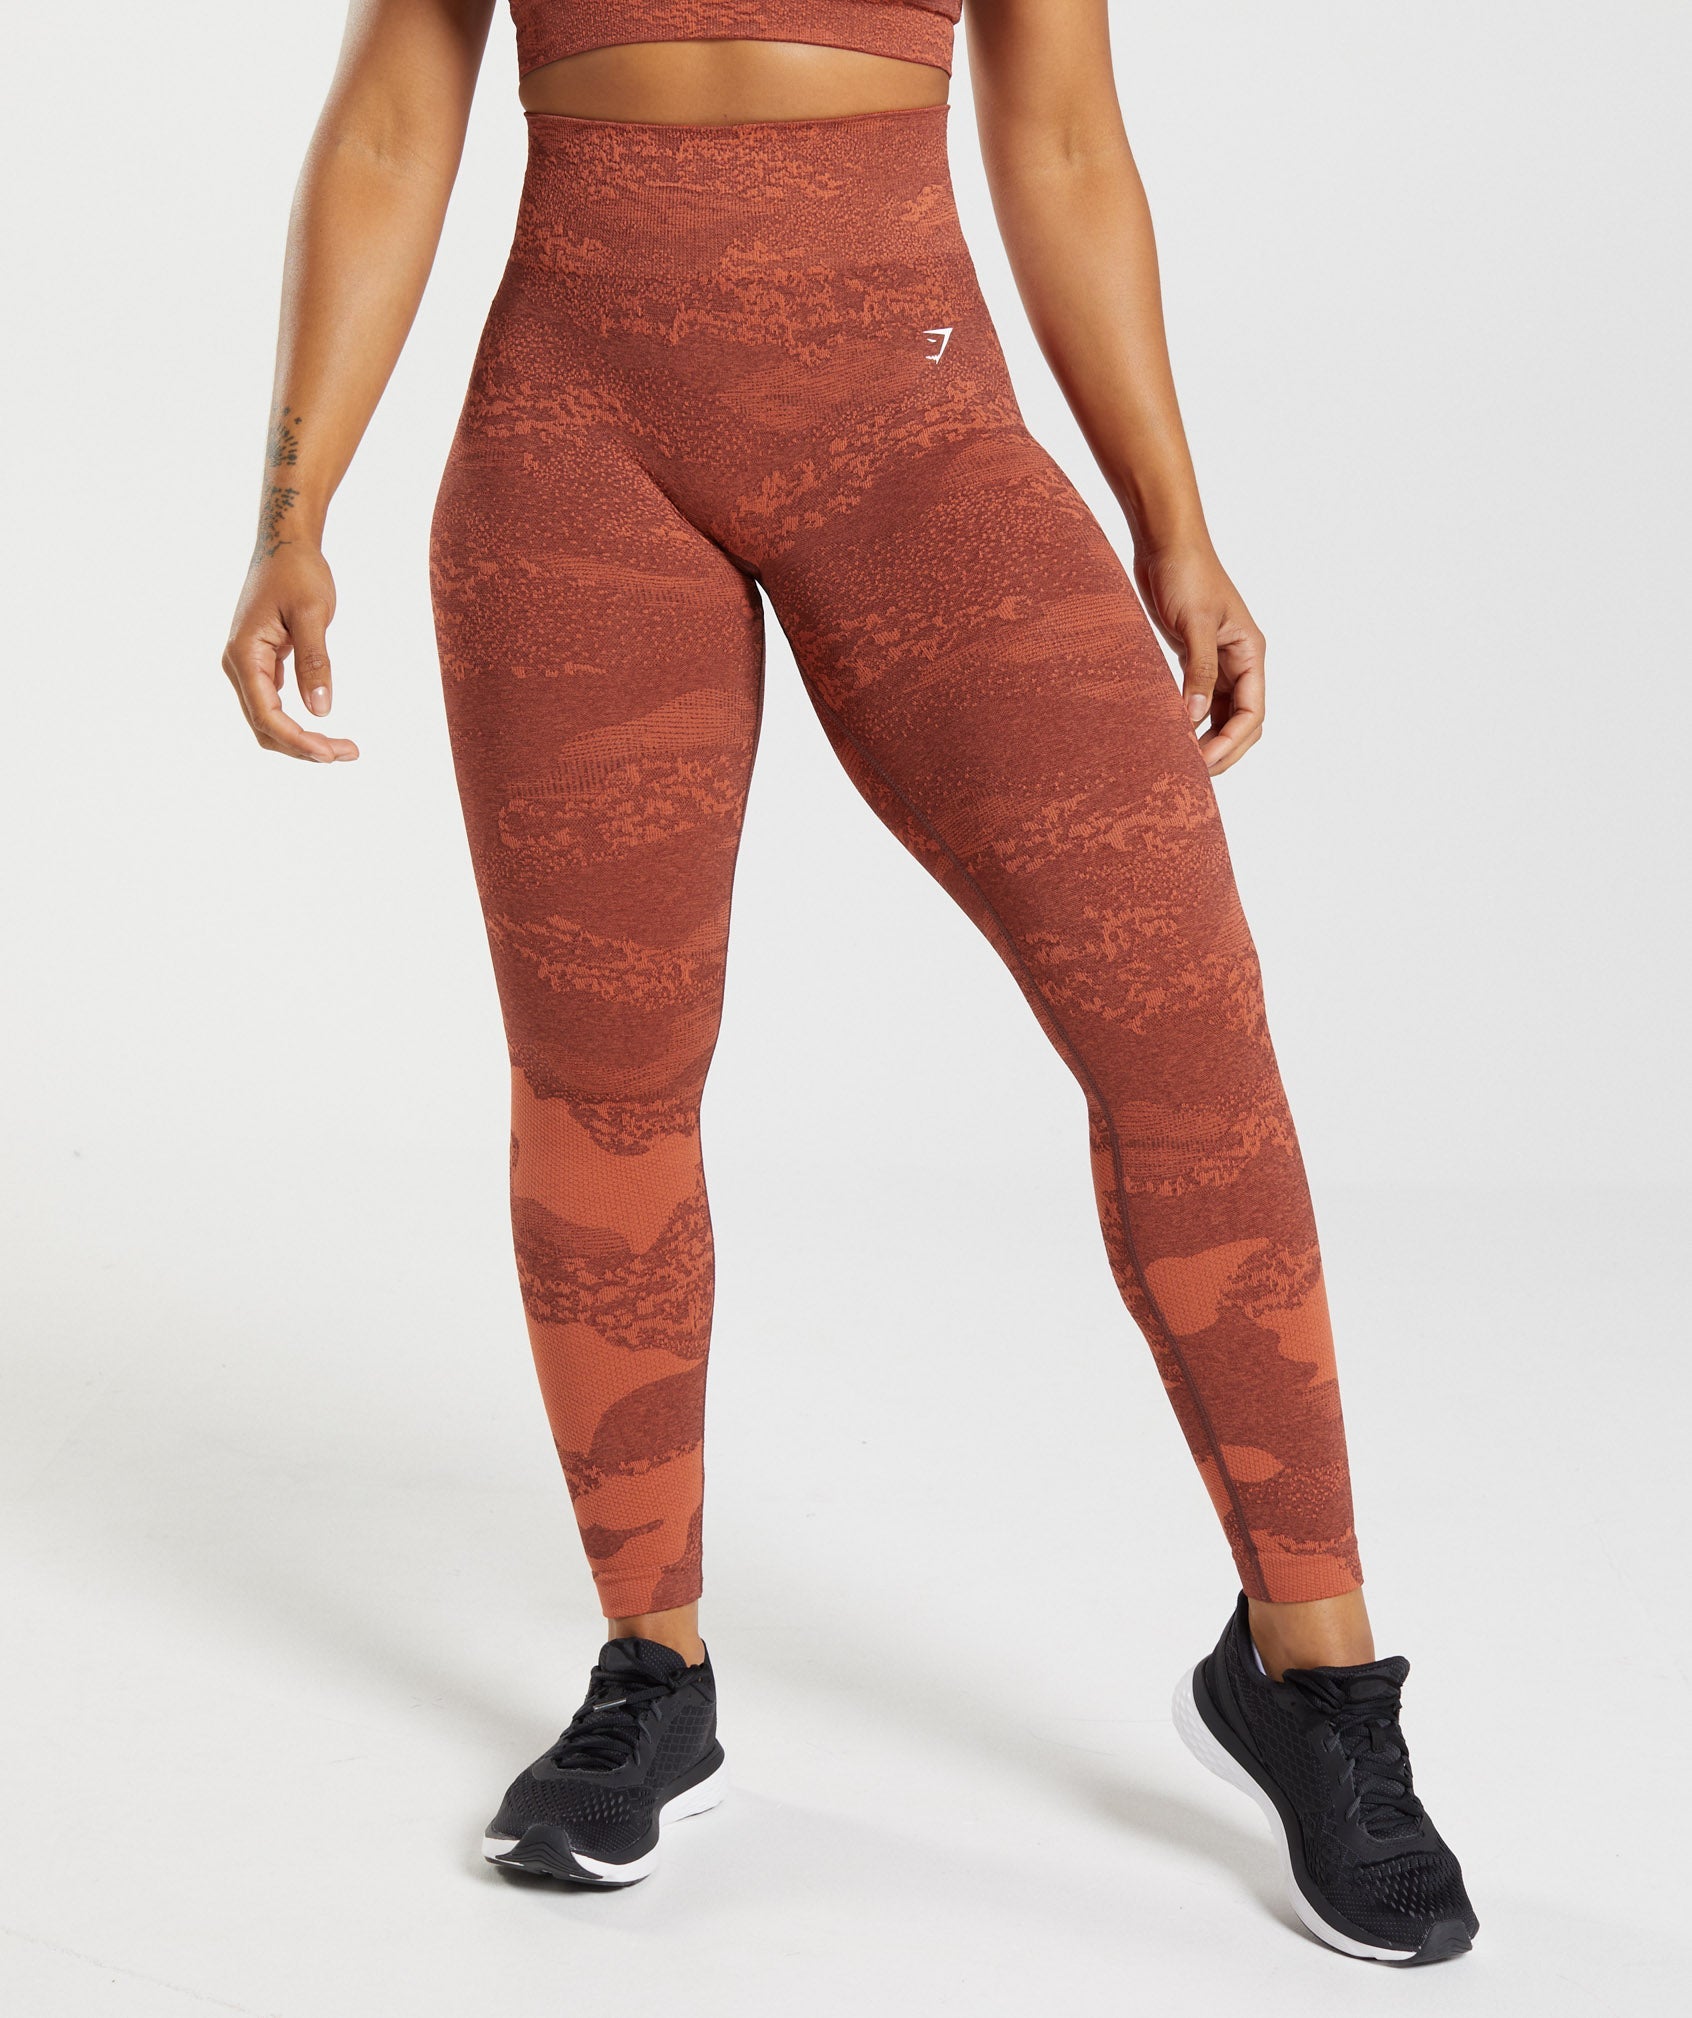 Adapt Camo Seamless Leggings in Storm Red/Cherry Brown - view 1